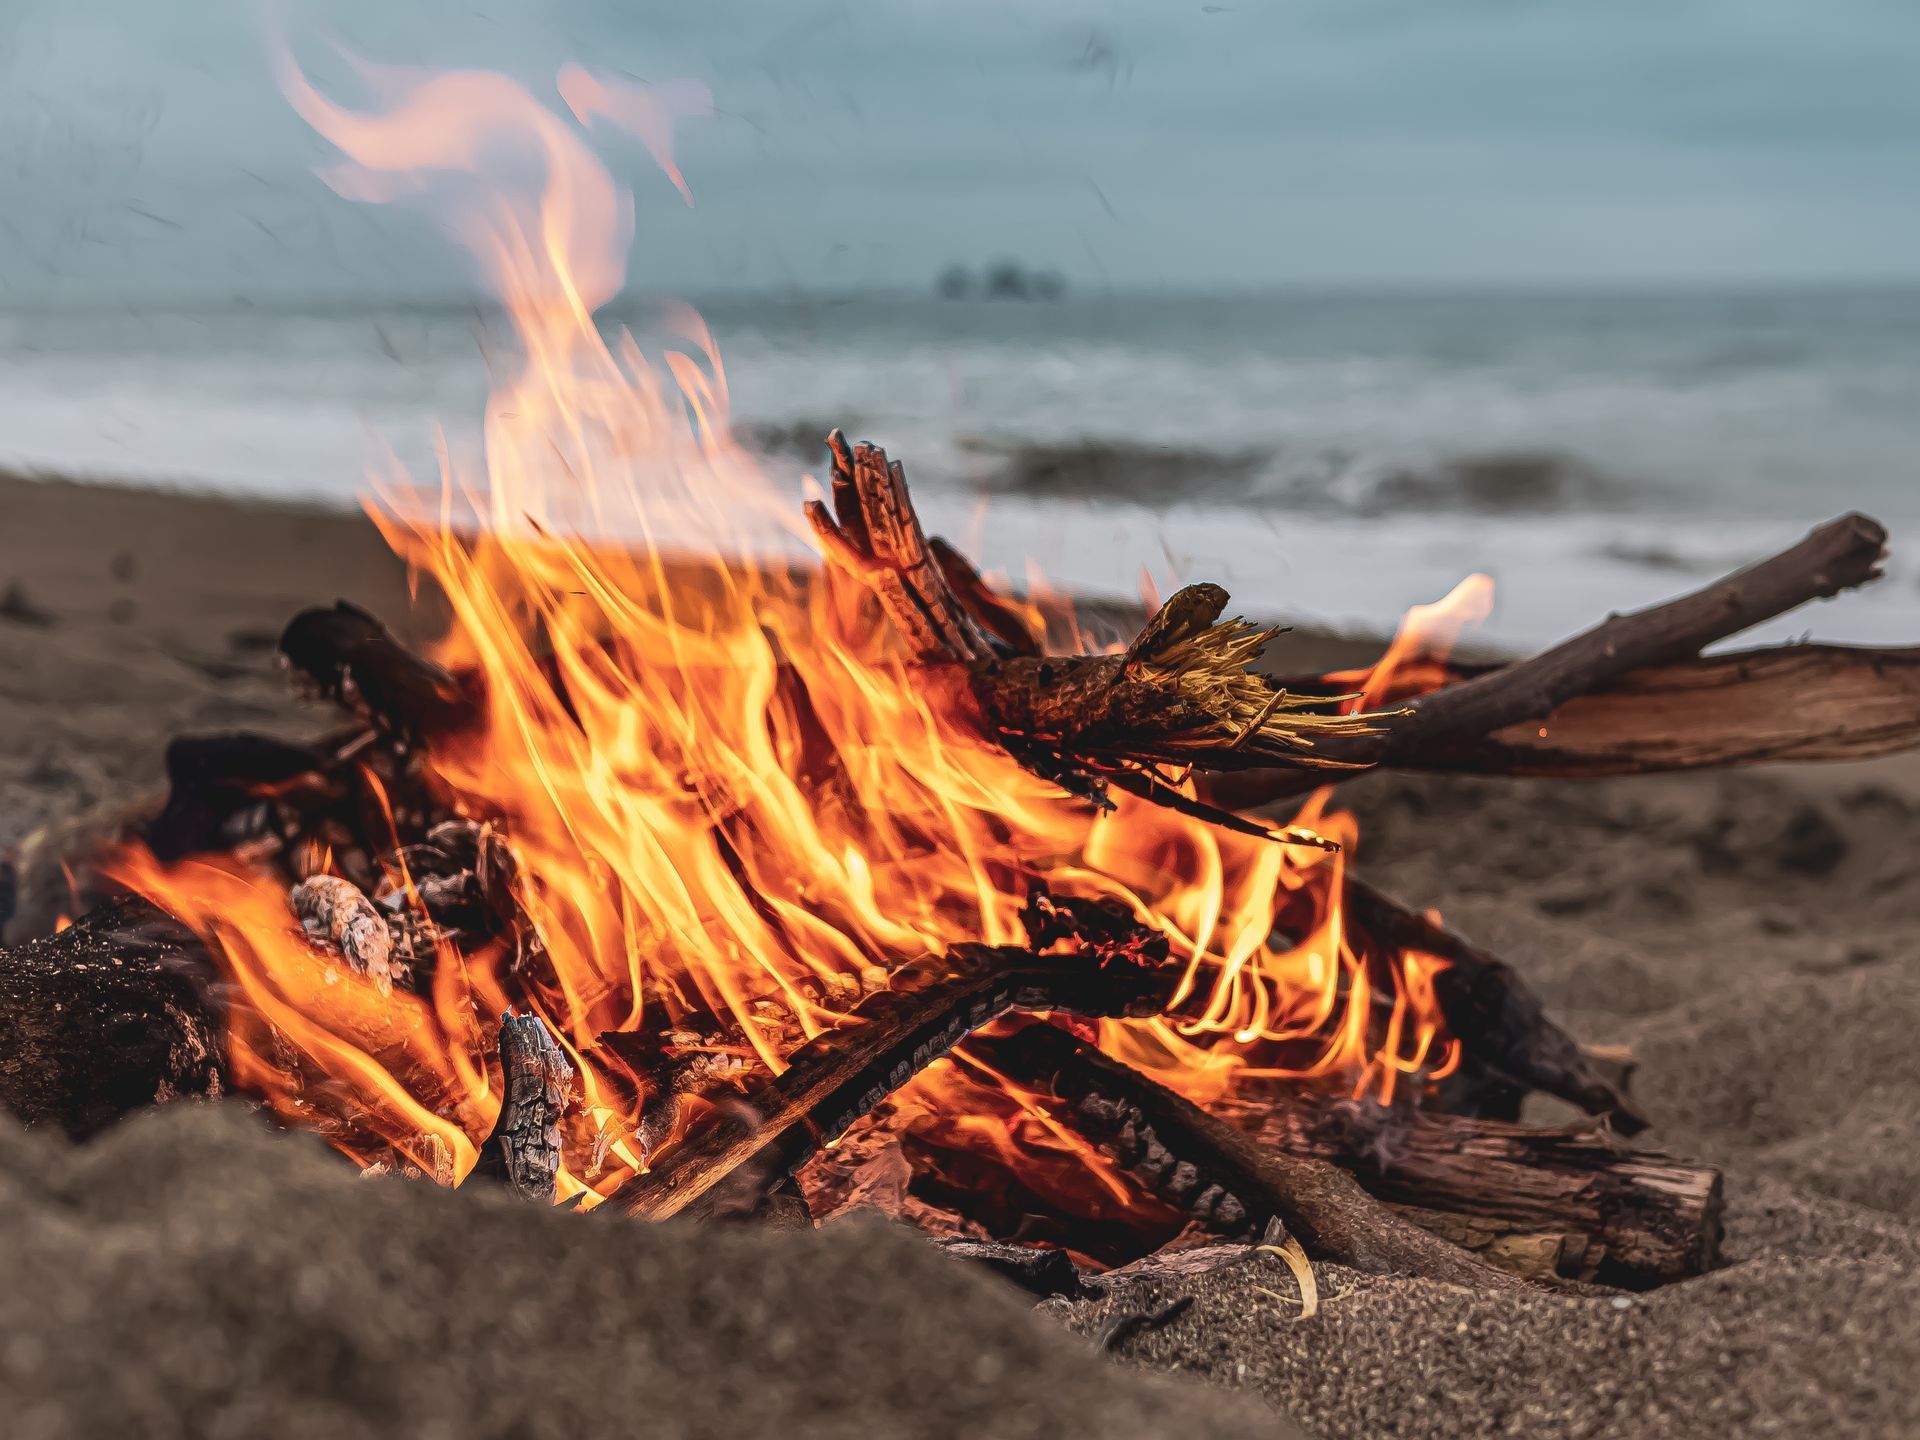 Bonfire on the beach with ocean in background